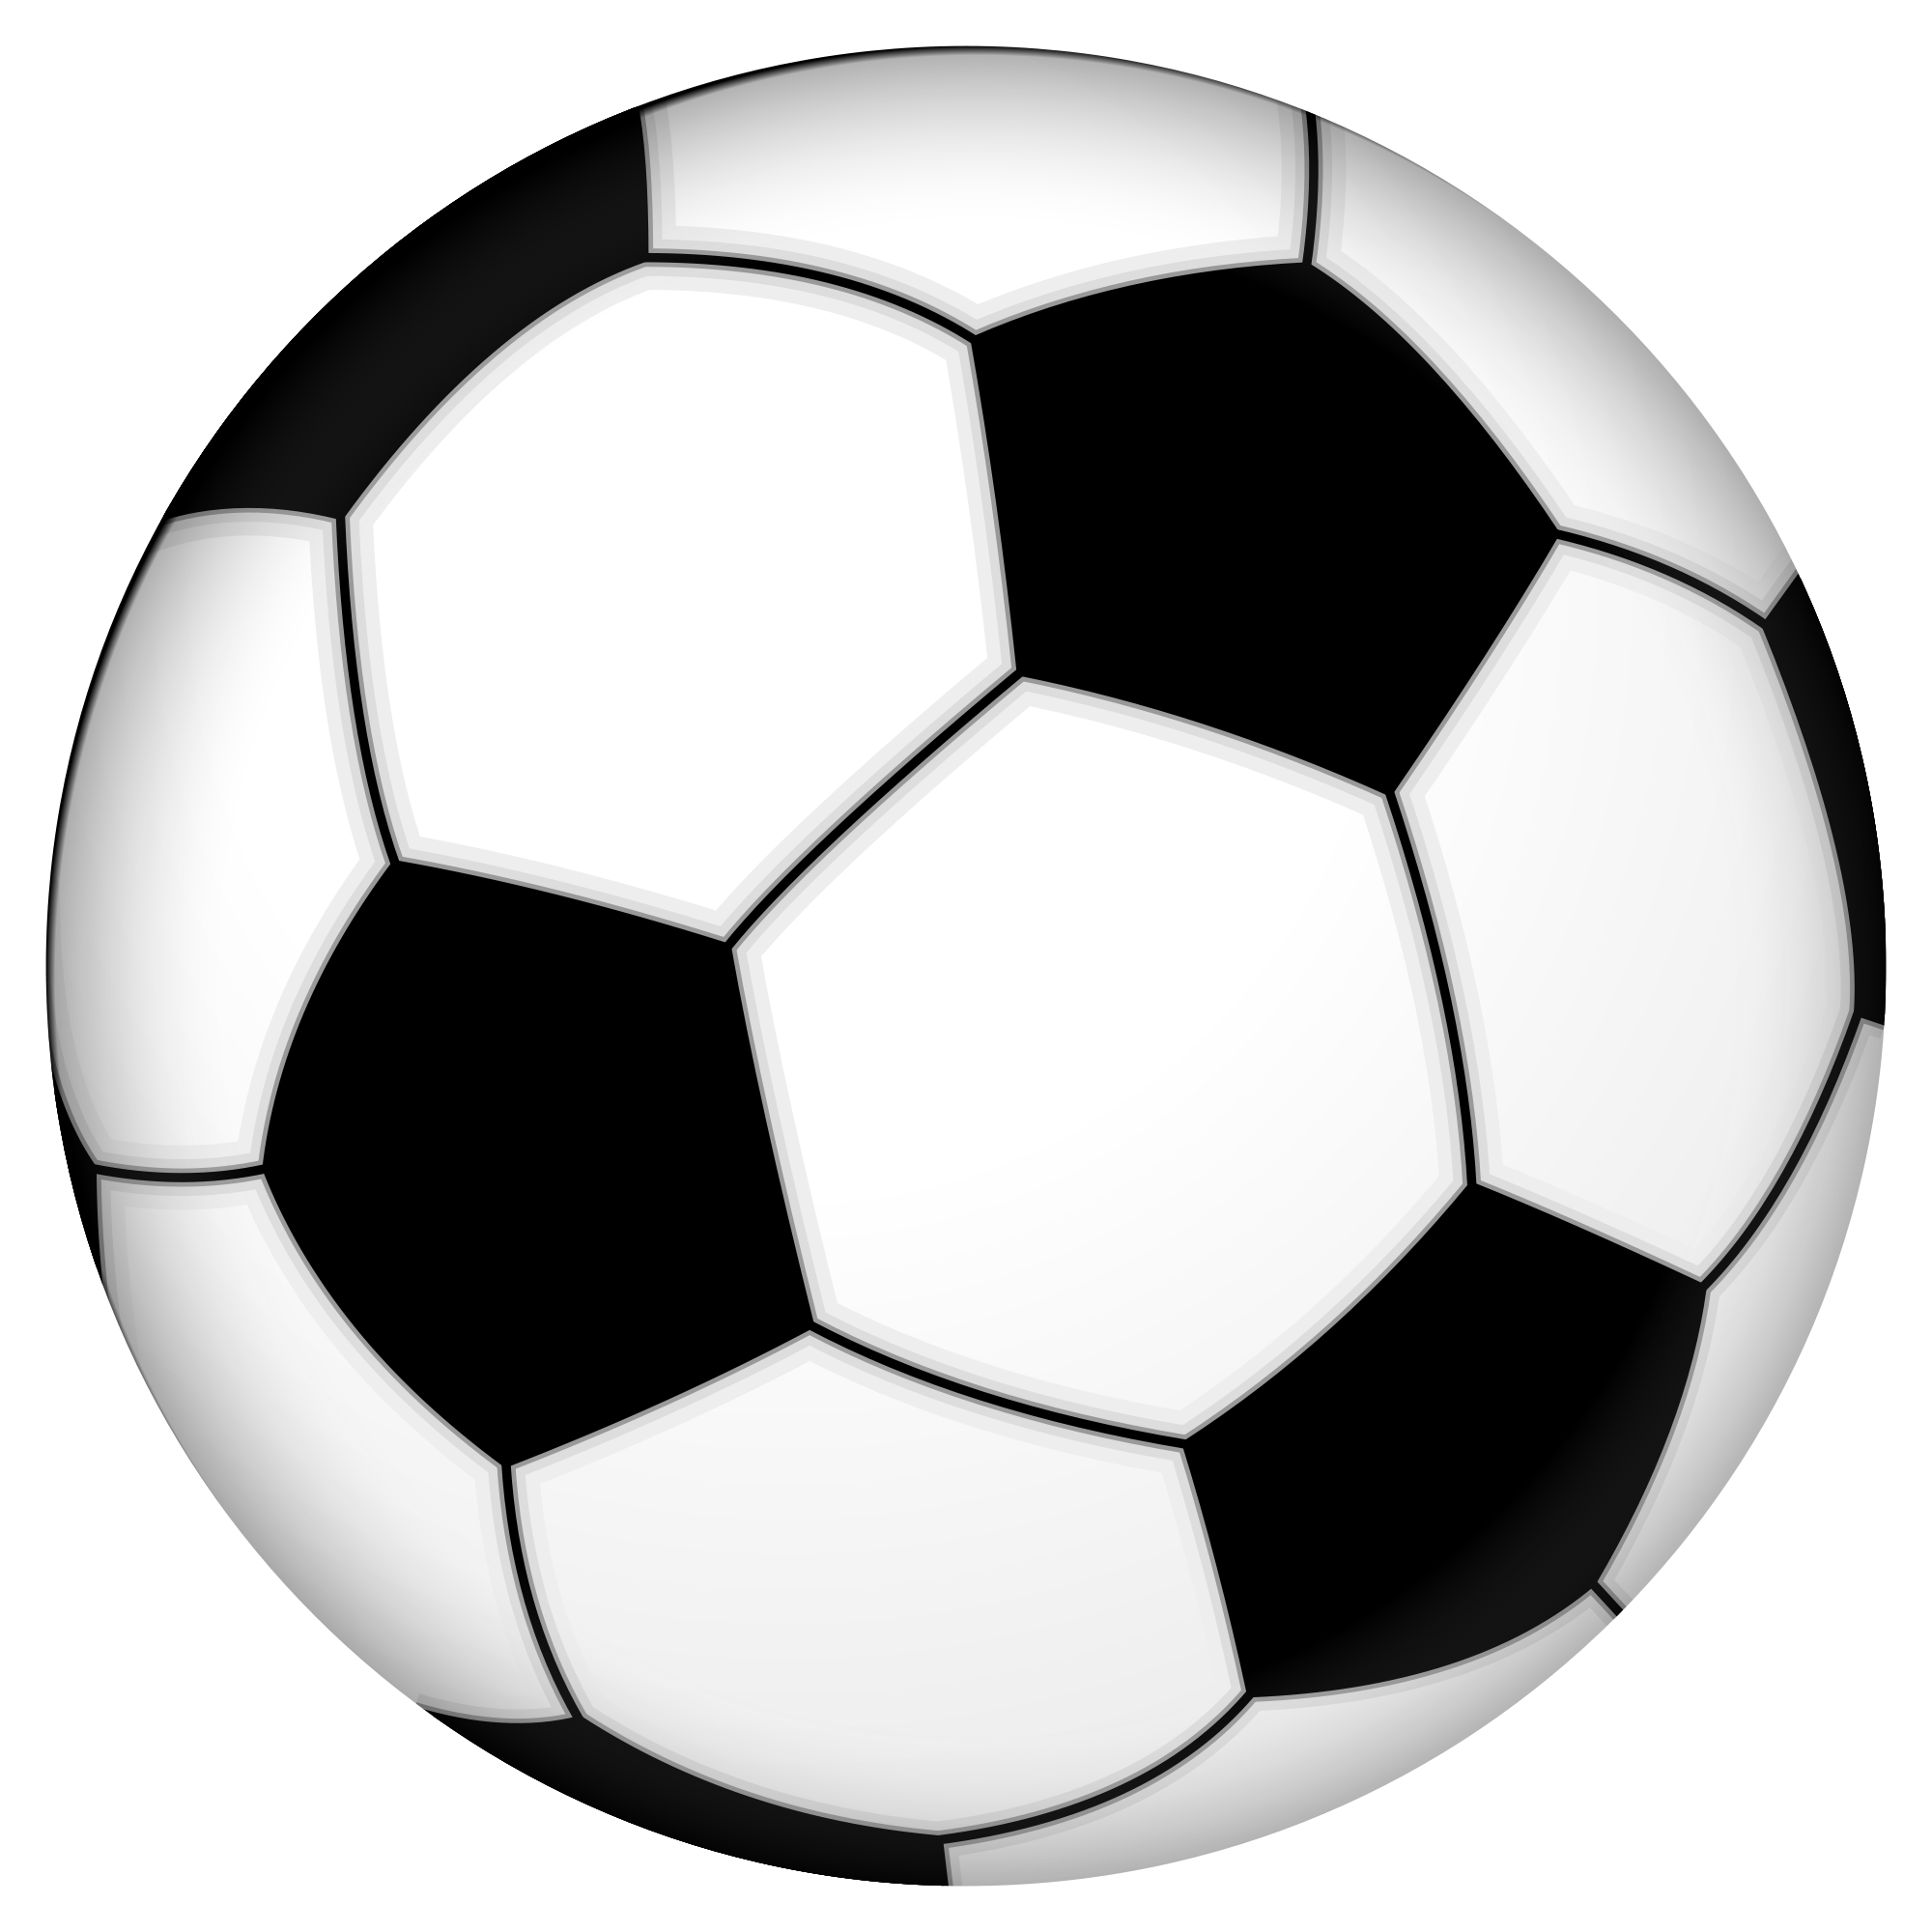 File:Soccerball.png - Wikimedia Commons